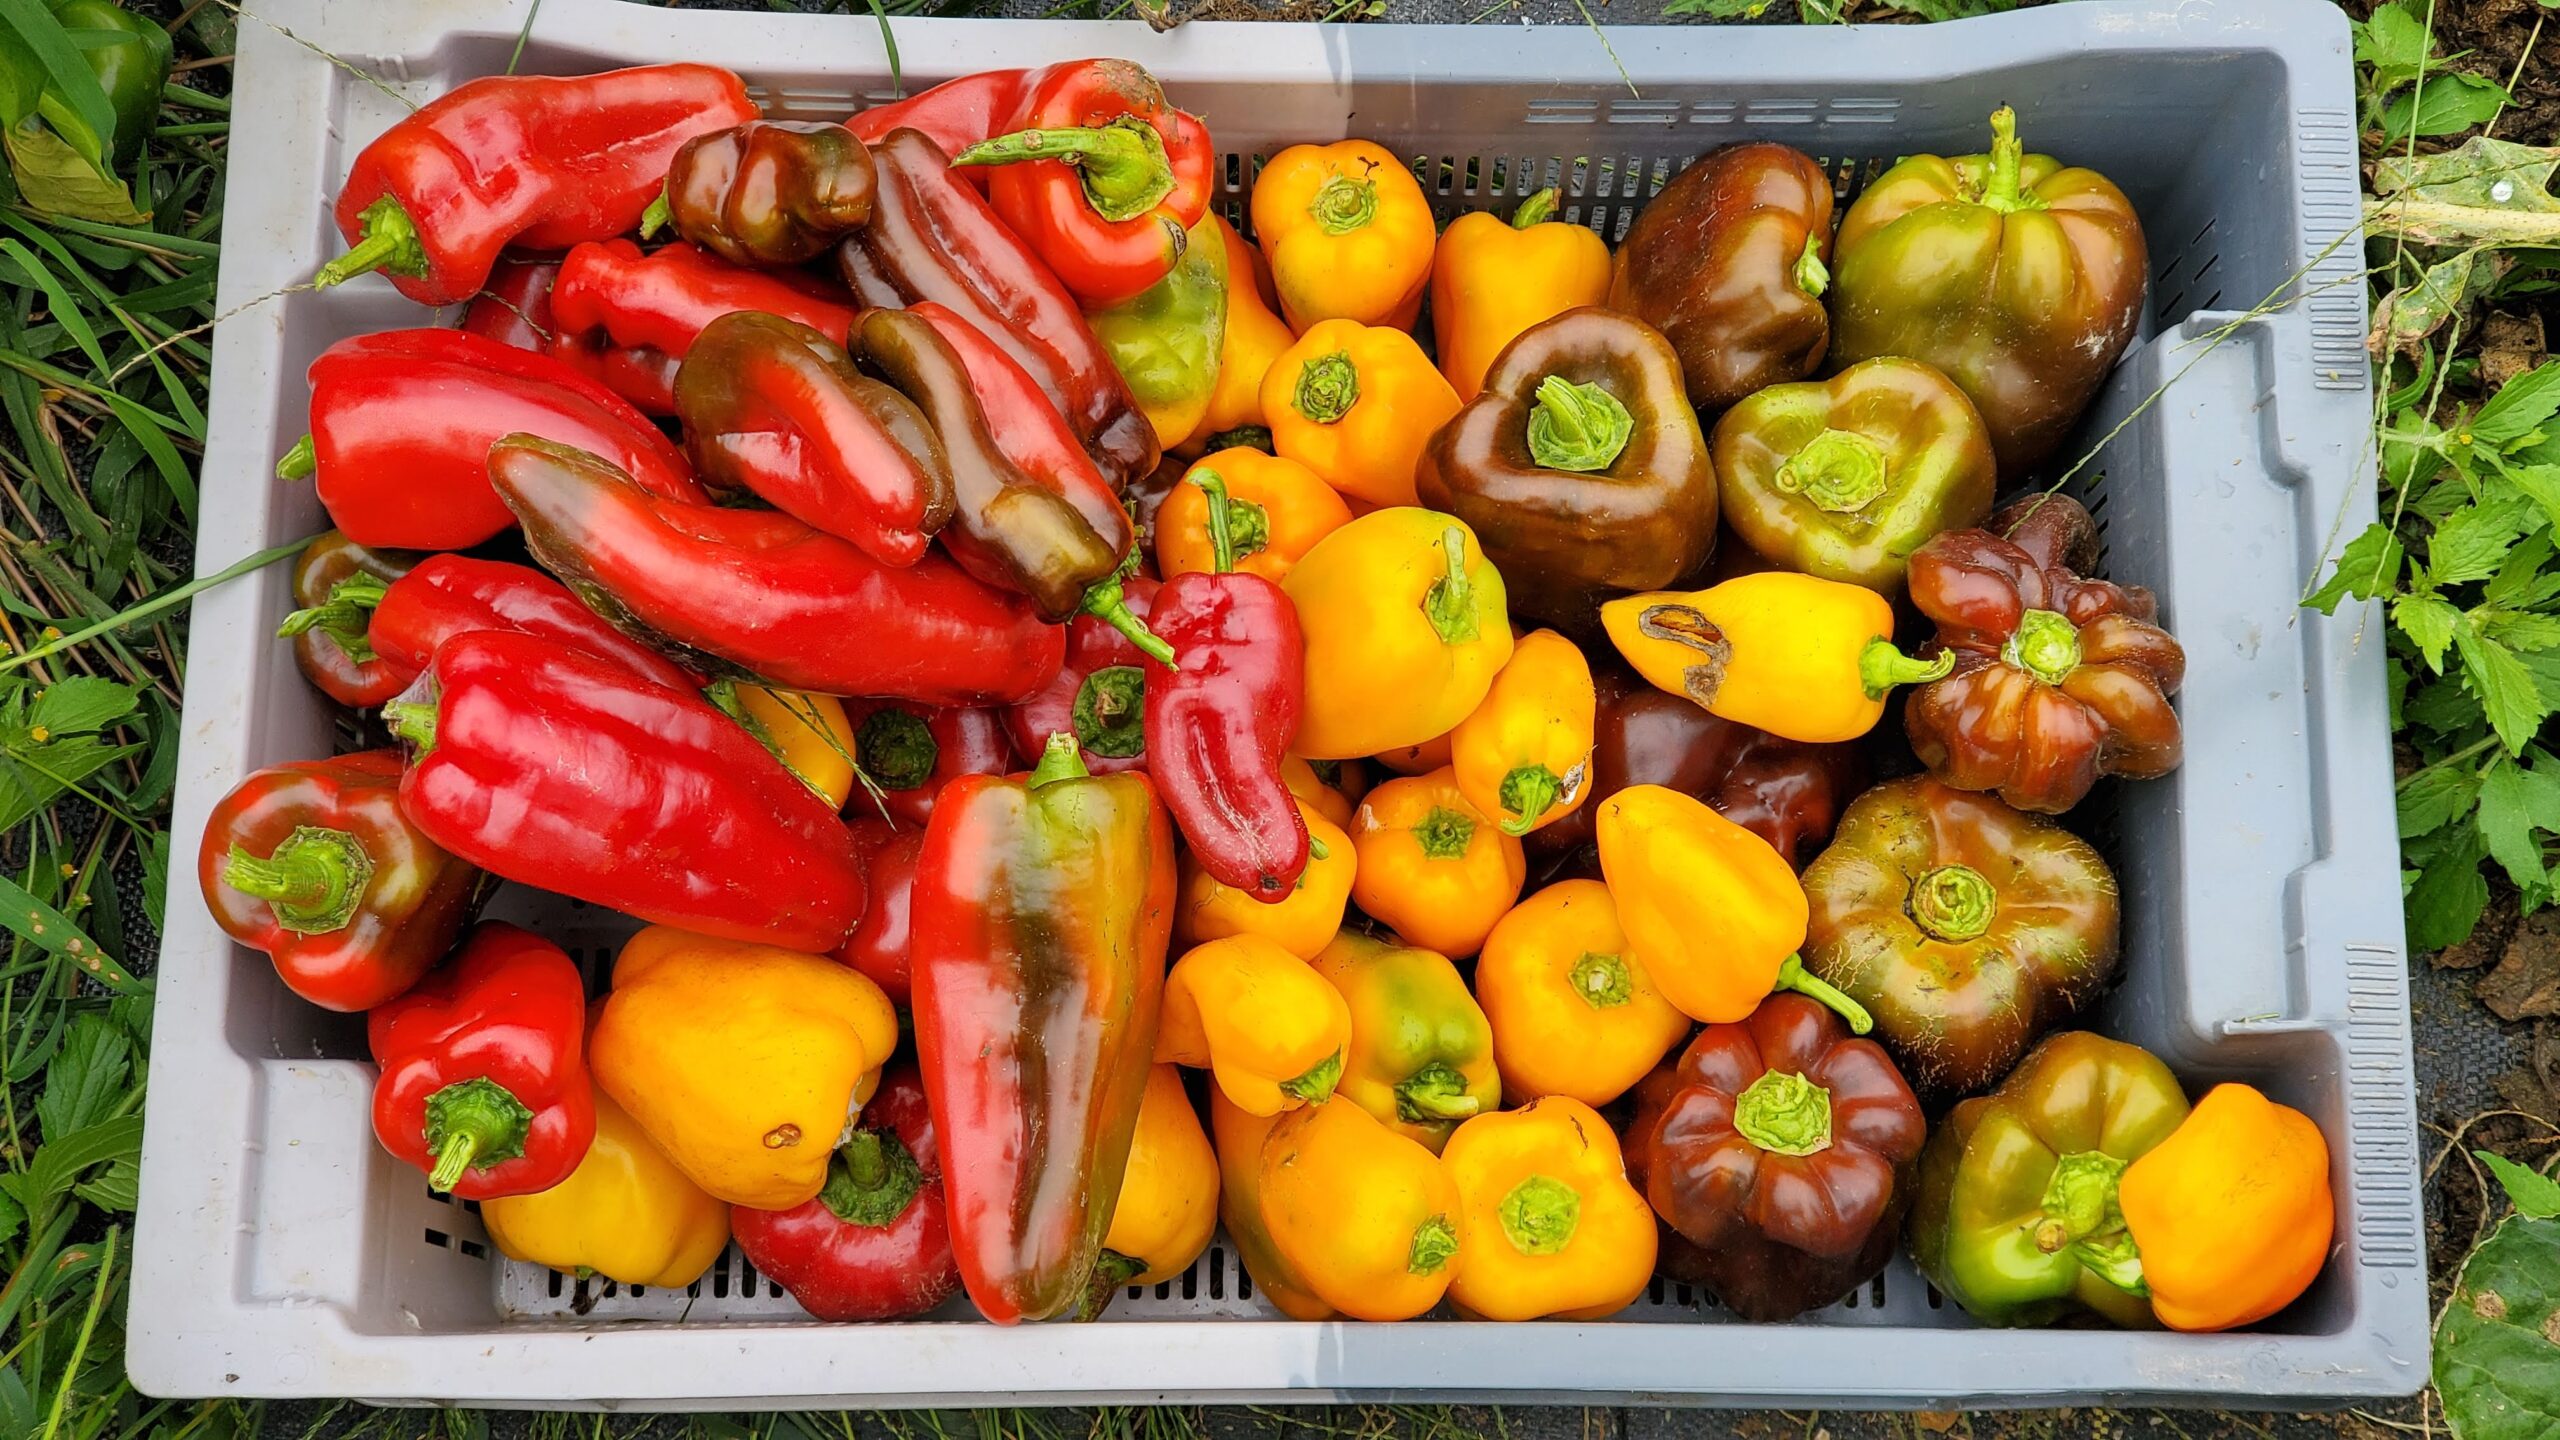 Heirloom Peppers in various colors and shapes in a plastic crate.